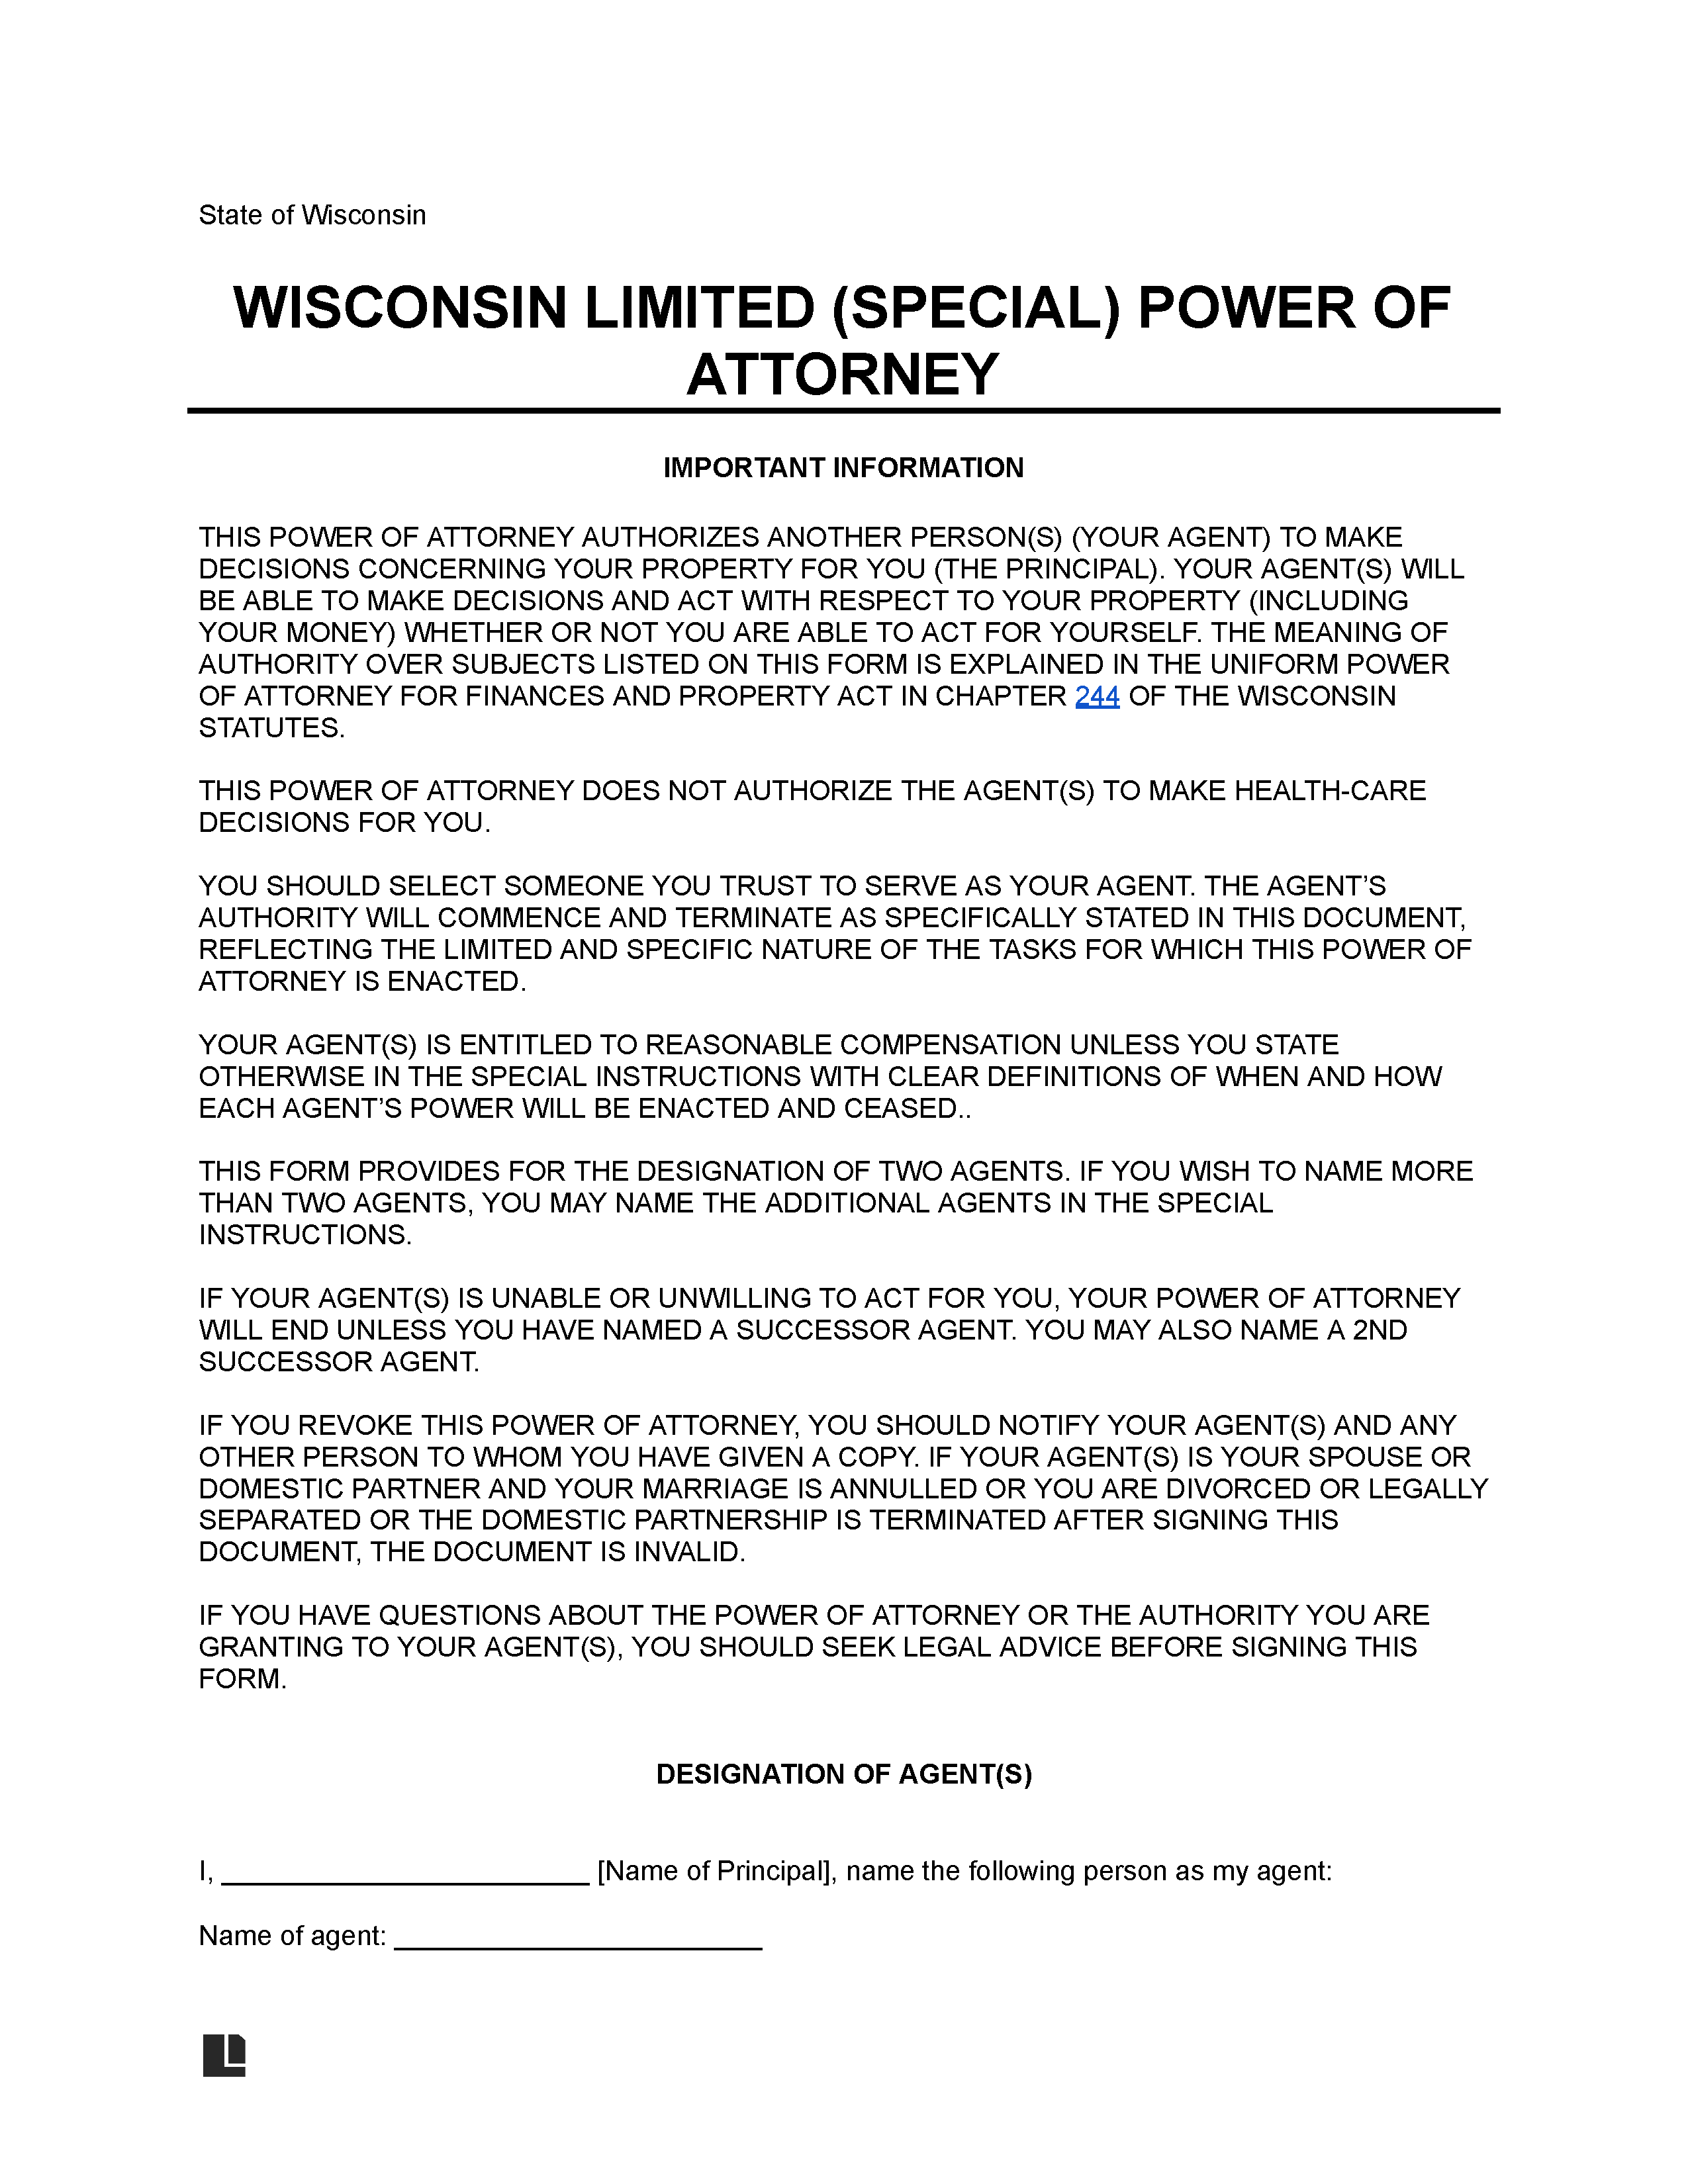 Wisconsin Limited Power of Attorney Form